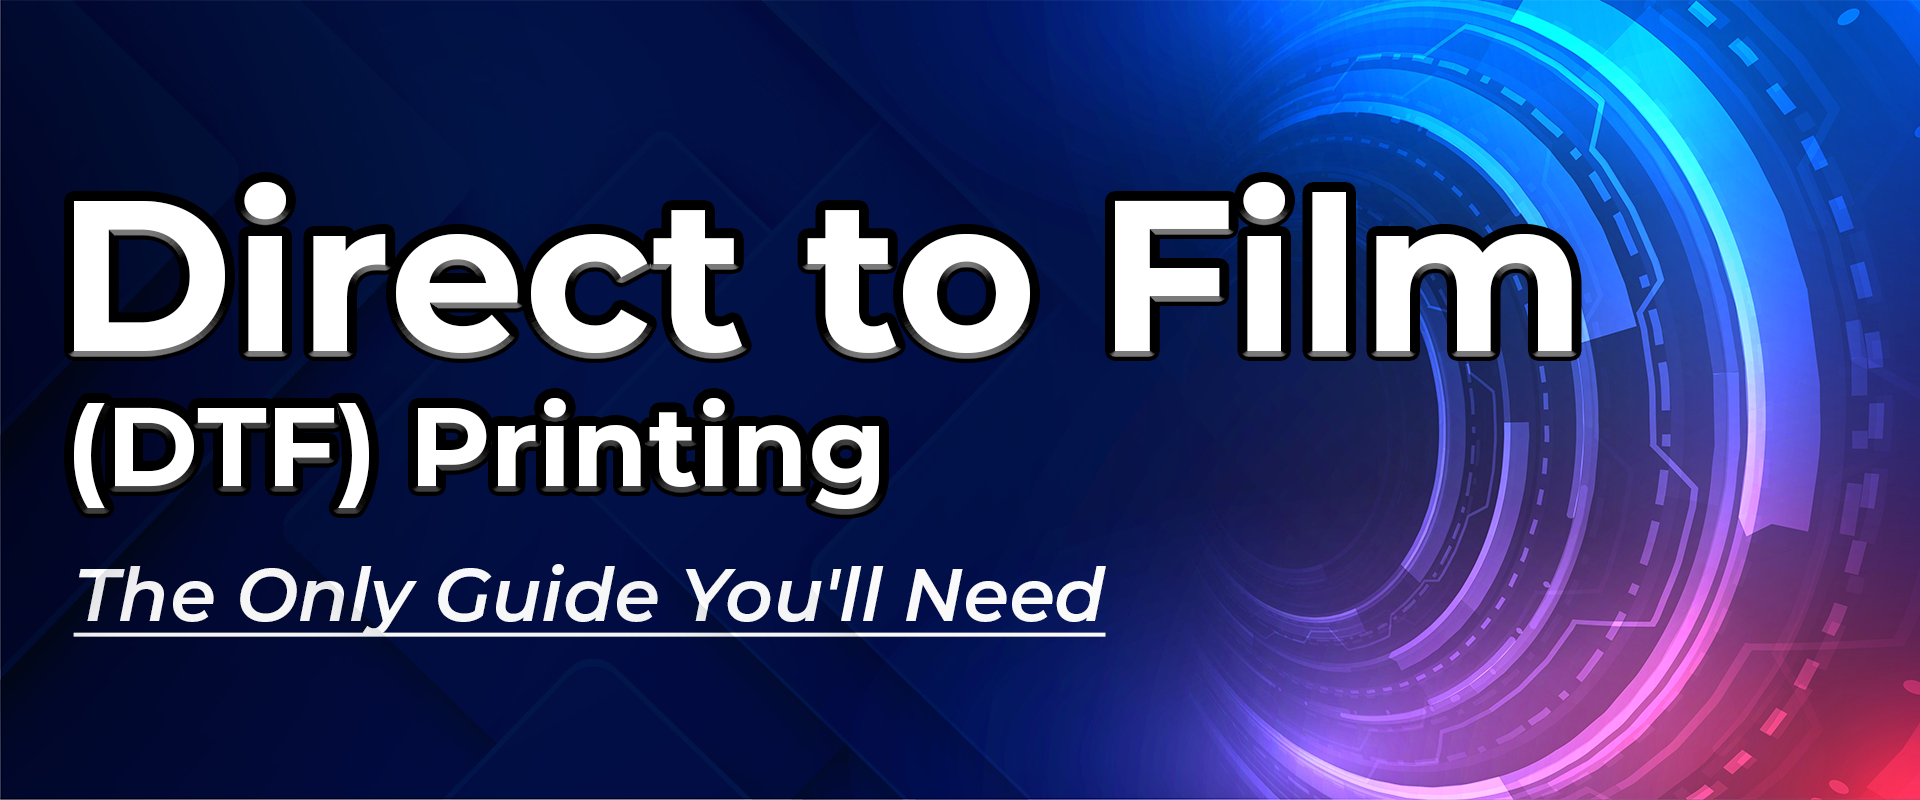 direct to film dtf printing the only guide youll need all american print supply co